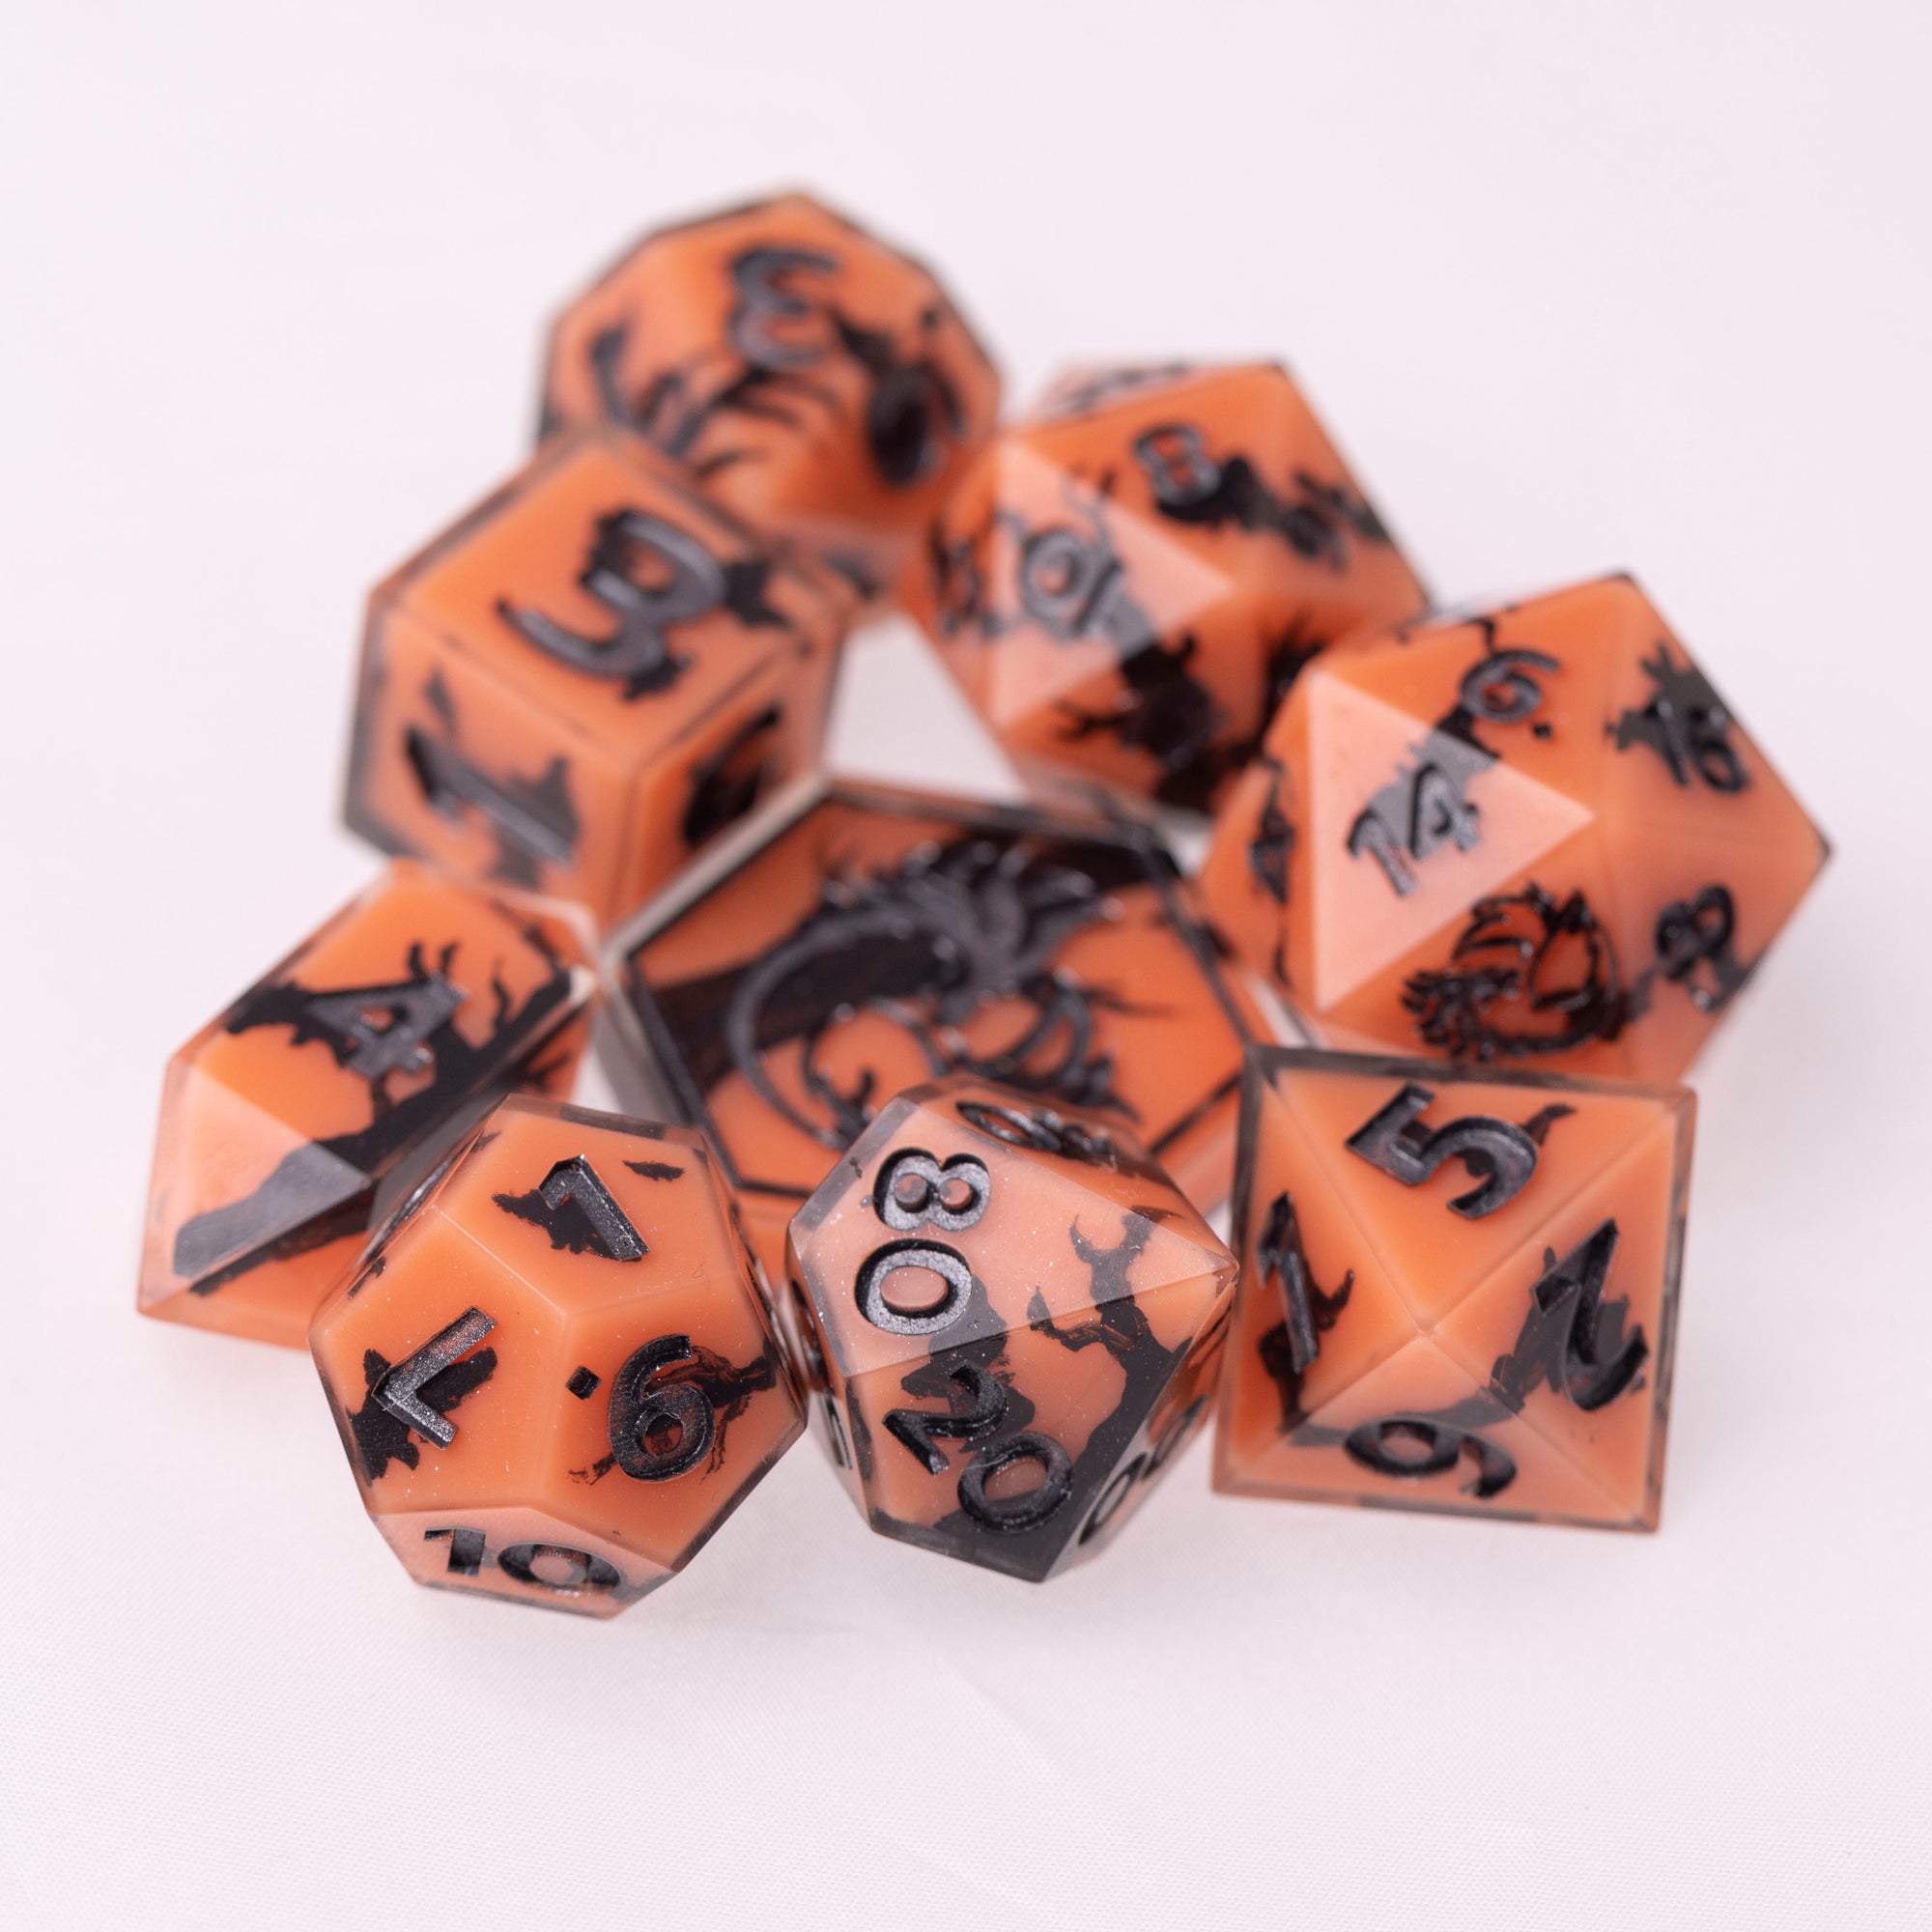 Creepy Critters of the Night - 9 Piece Dice Set